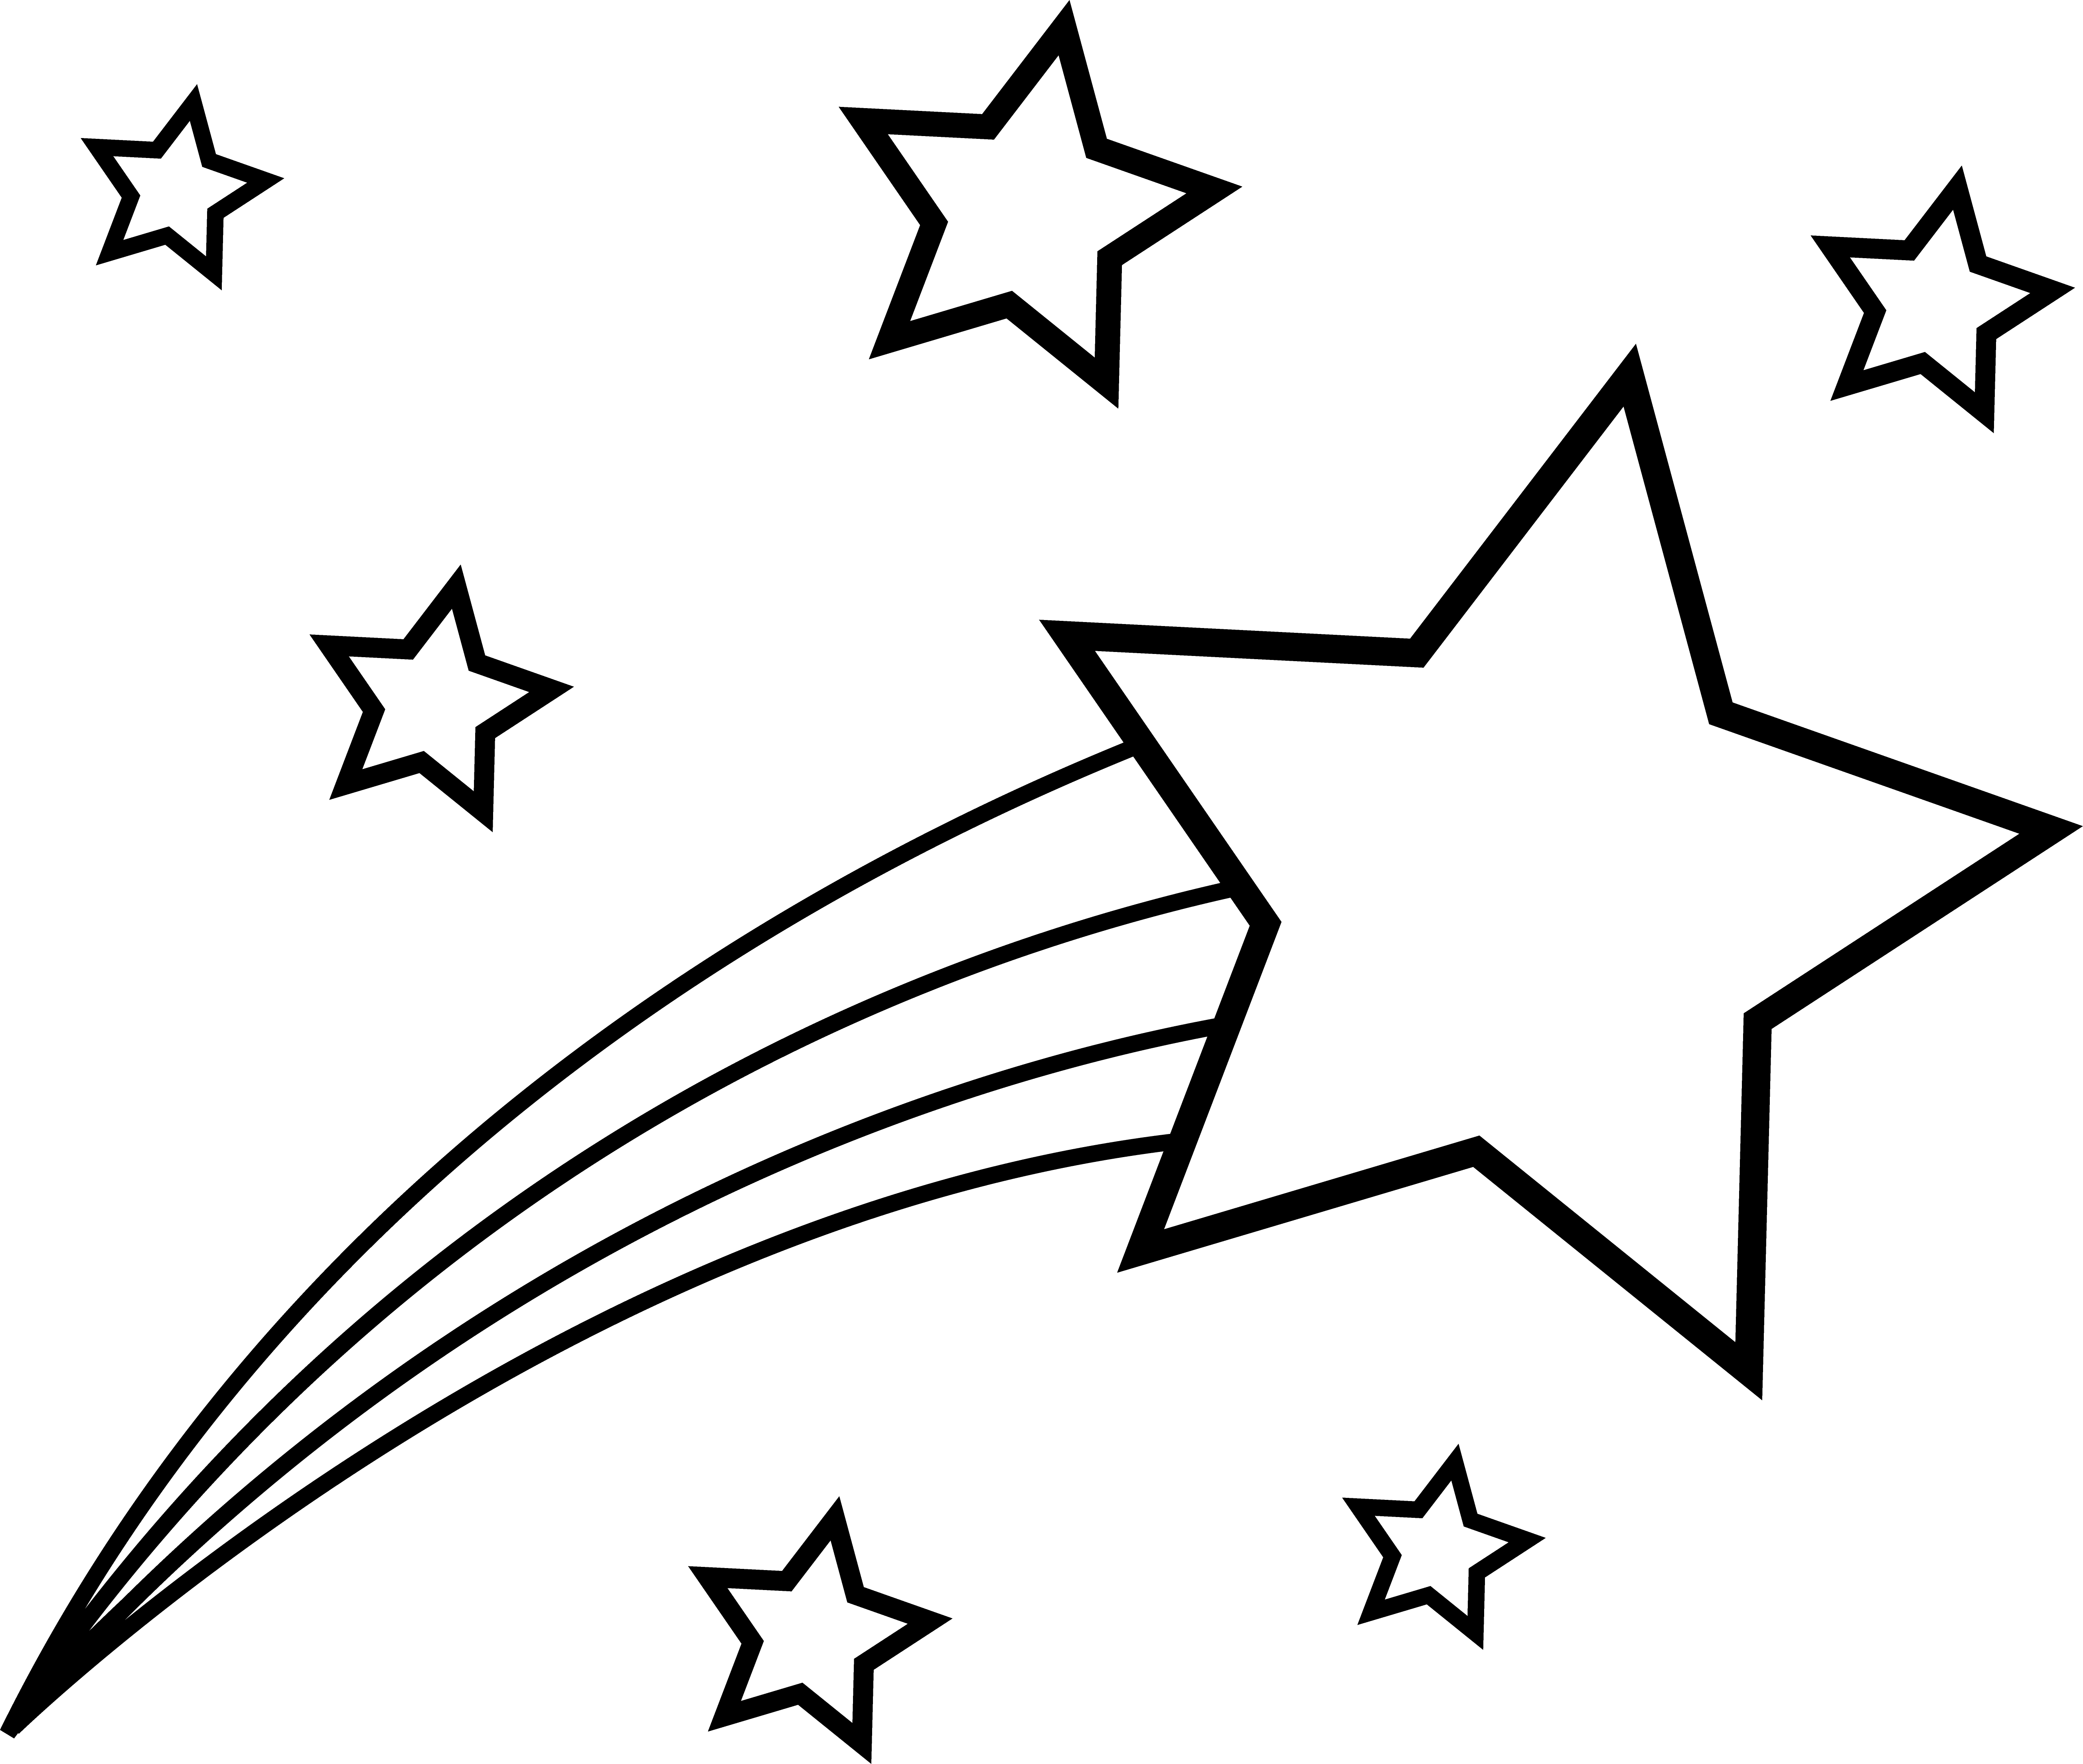 Shooting Star Clipart on . - Stars Clipart Black And White